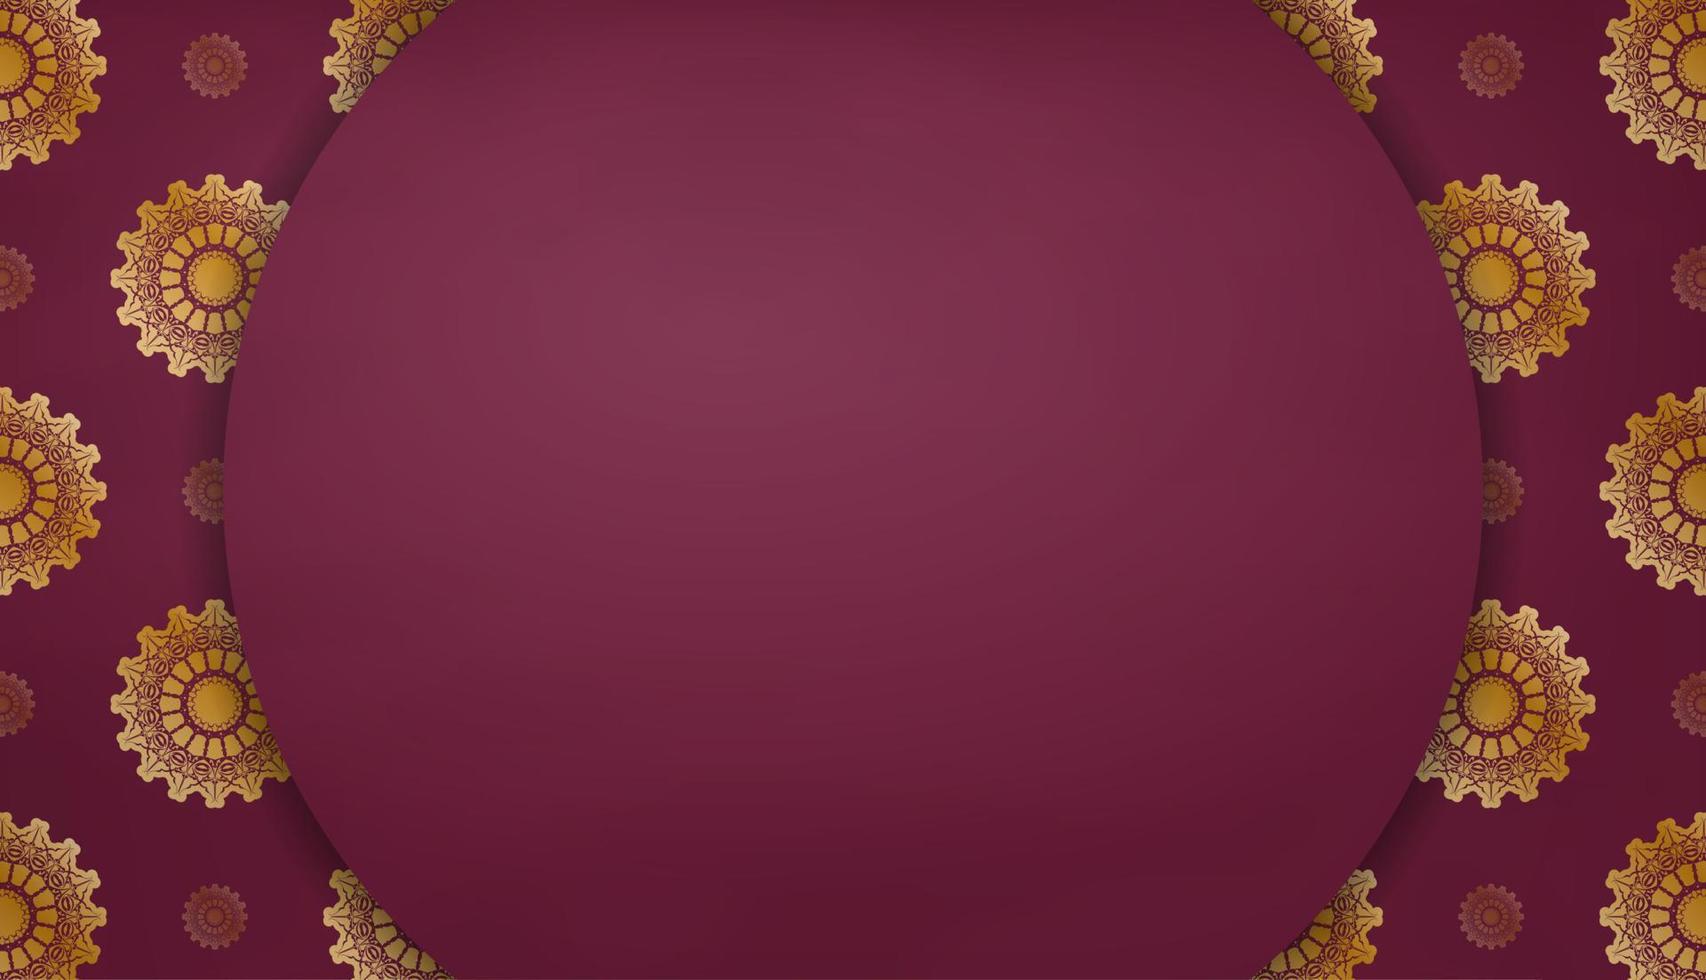 Burgundy banner with abstract gold pattern and place for logo or text vector